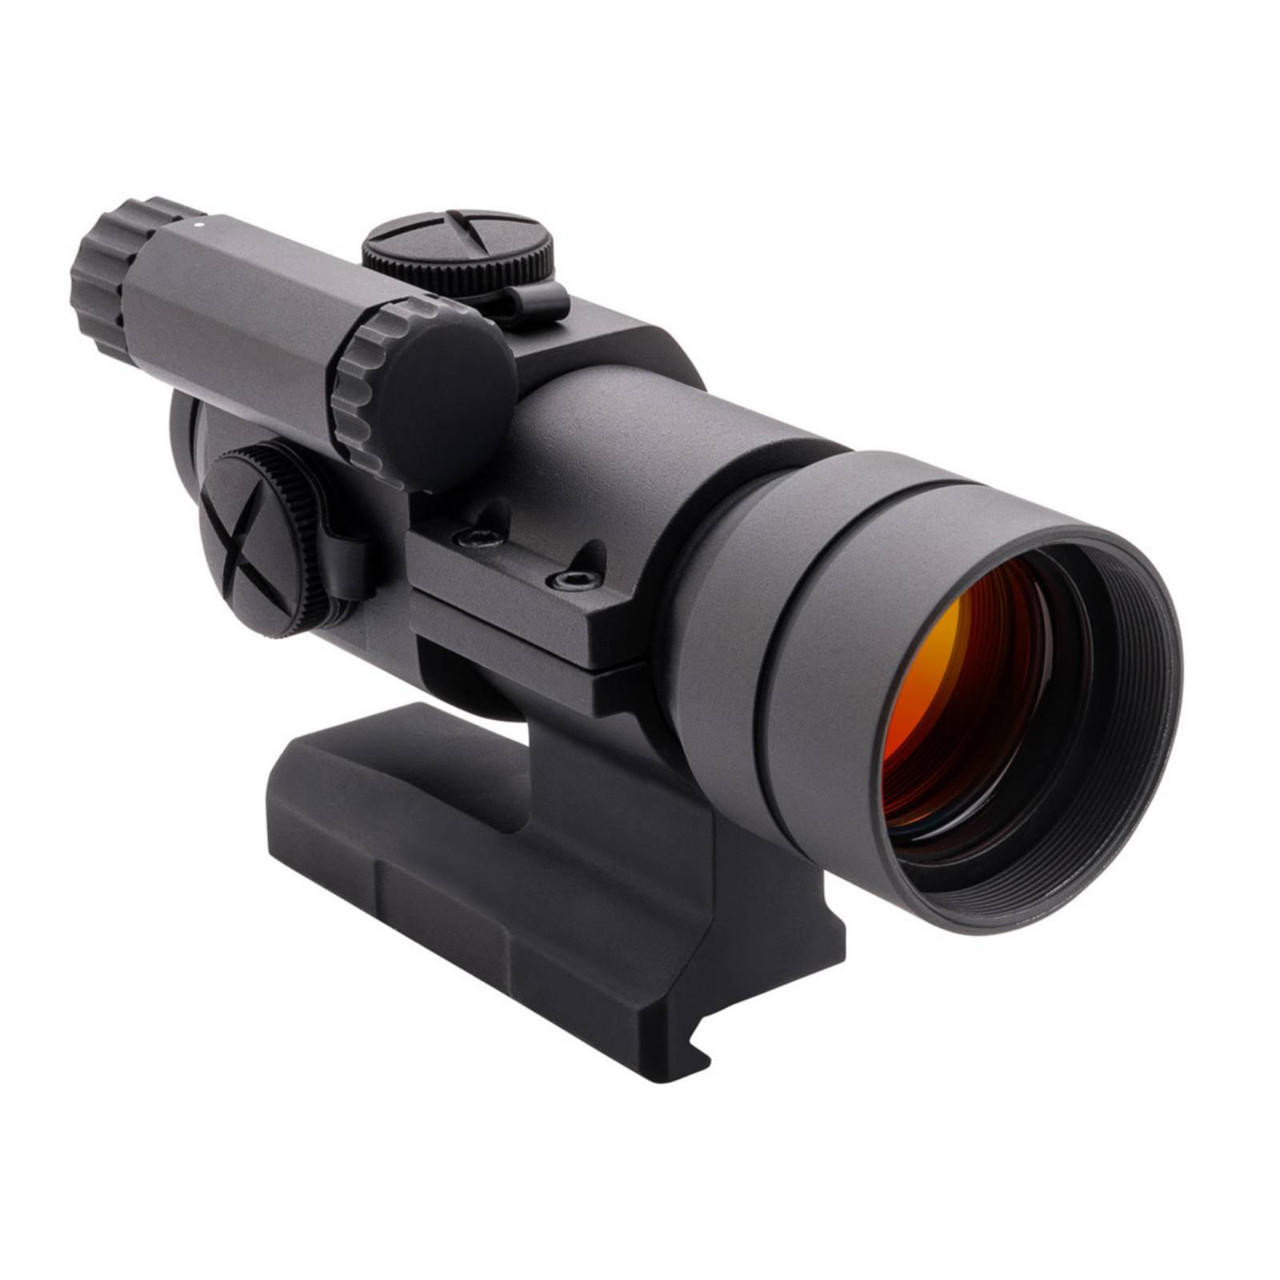 Aimpoint ACO (Aimpoint Carbine Optic) 2MOA Red Dot Sight - ROG Tactical